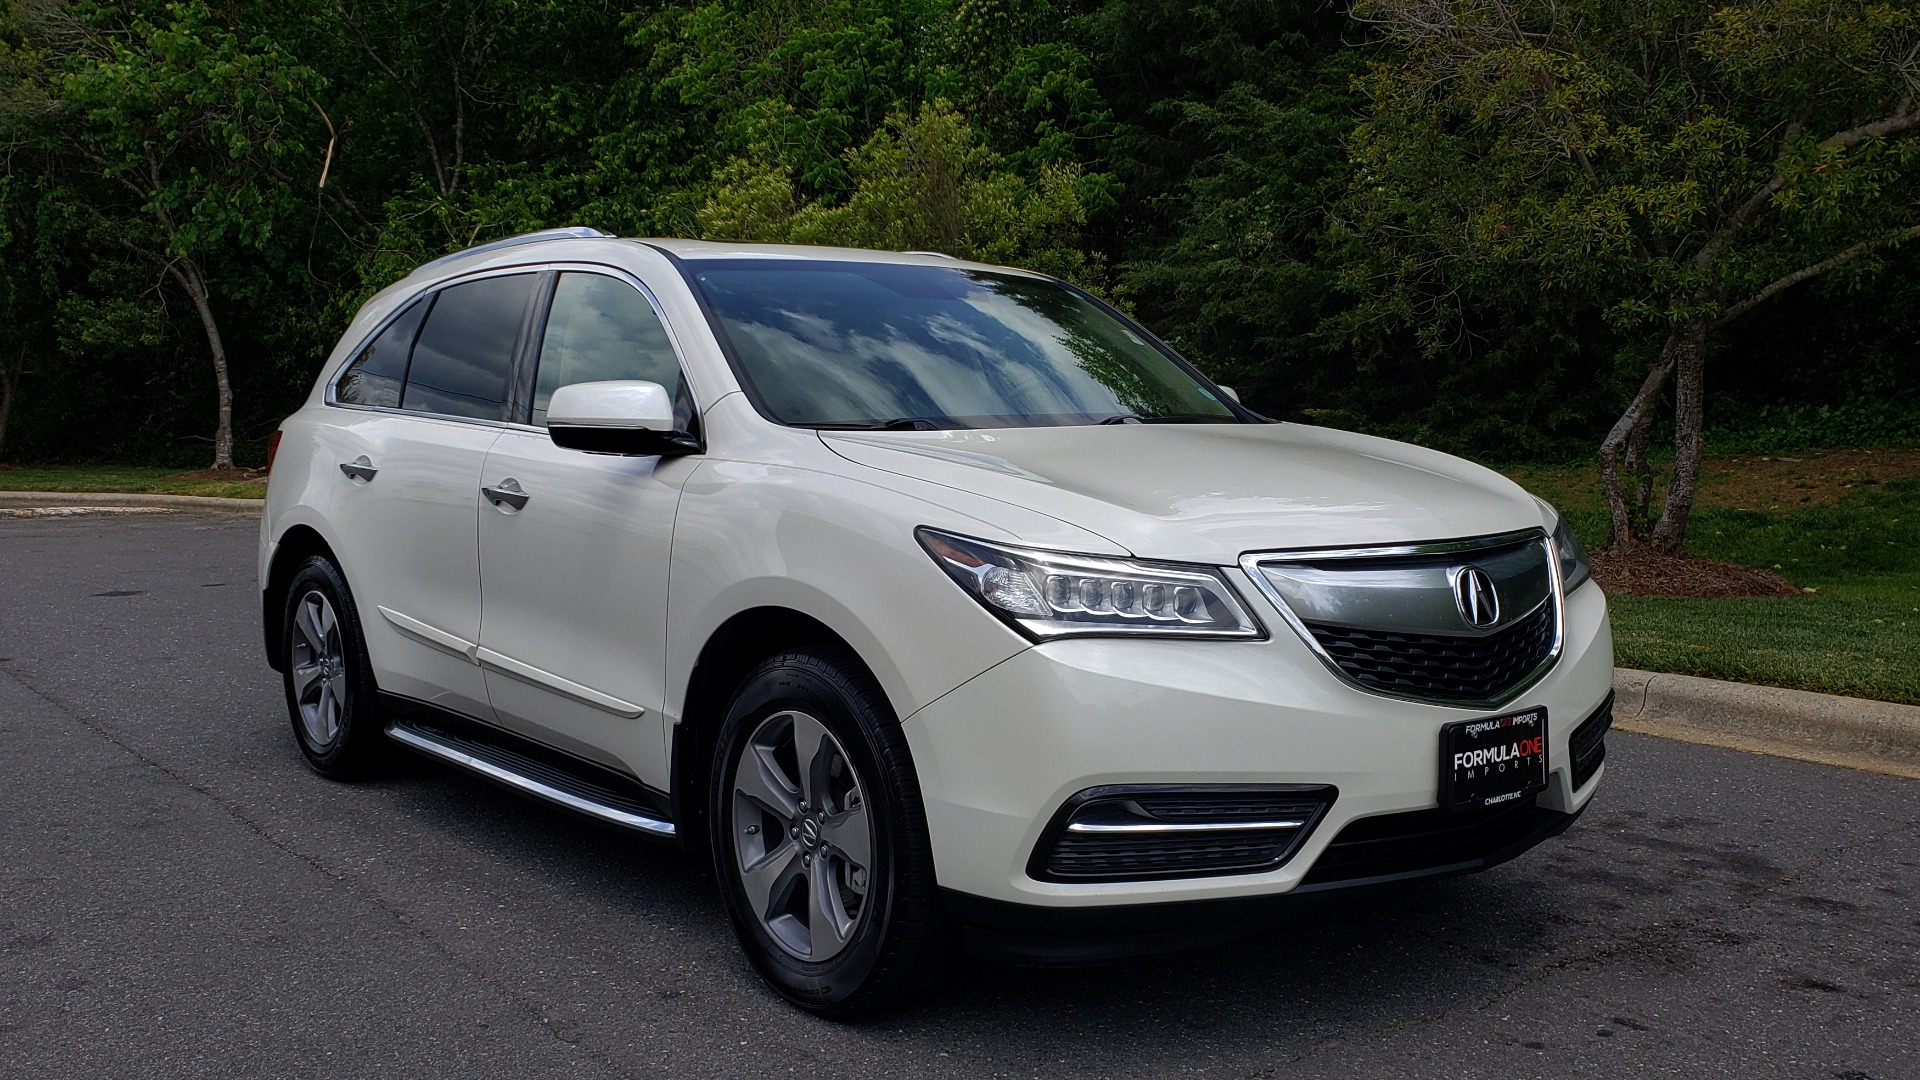 Used 2014 Acura MDX AWD / NAV / SUNROOF / 3-ROW / REARVIEW / PREMIUM SND for sale Sold at Formula Imports in Charlotte NC 28227 4